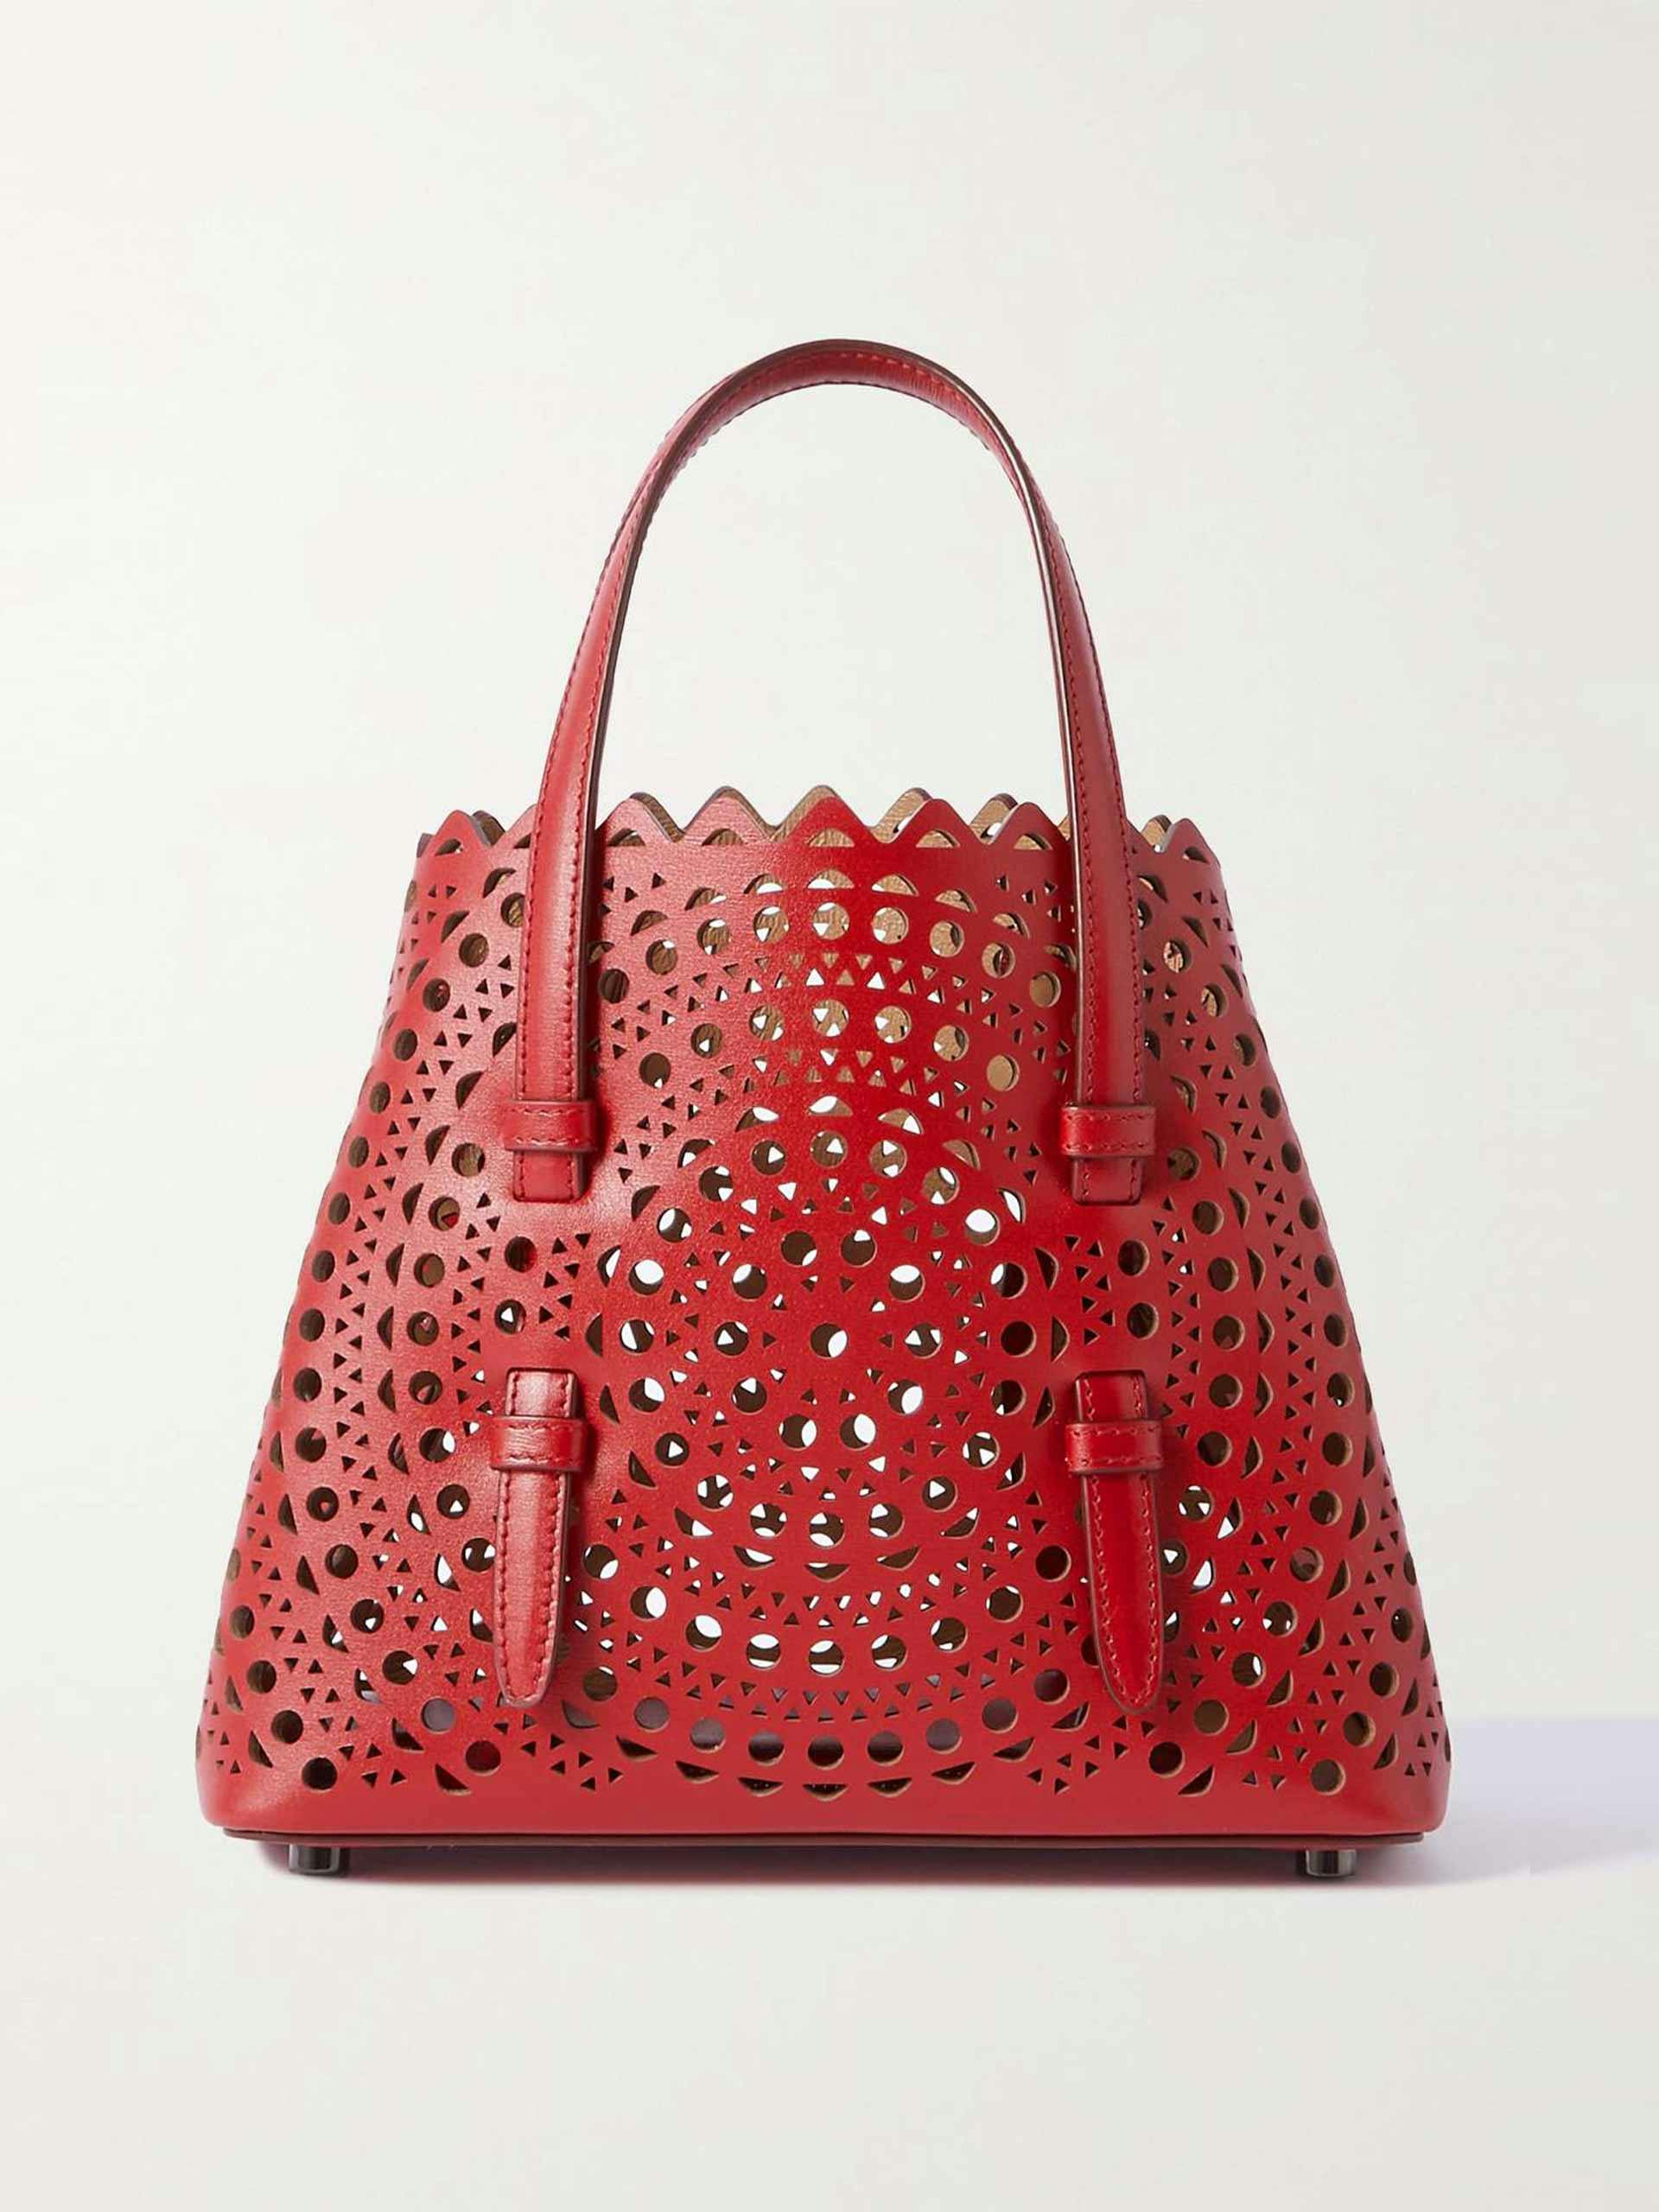 Red lasercut leather tote